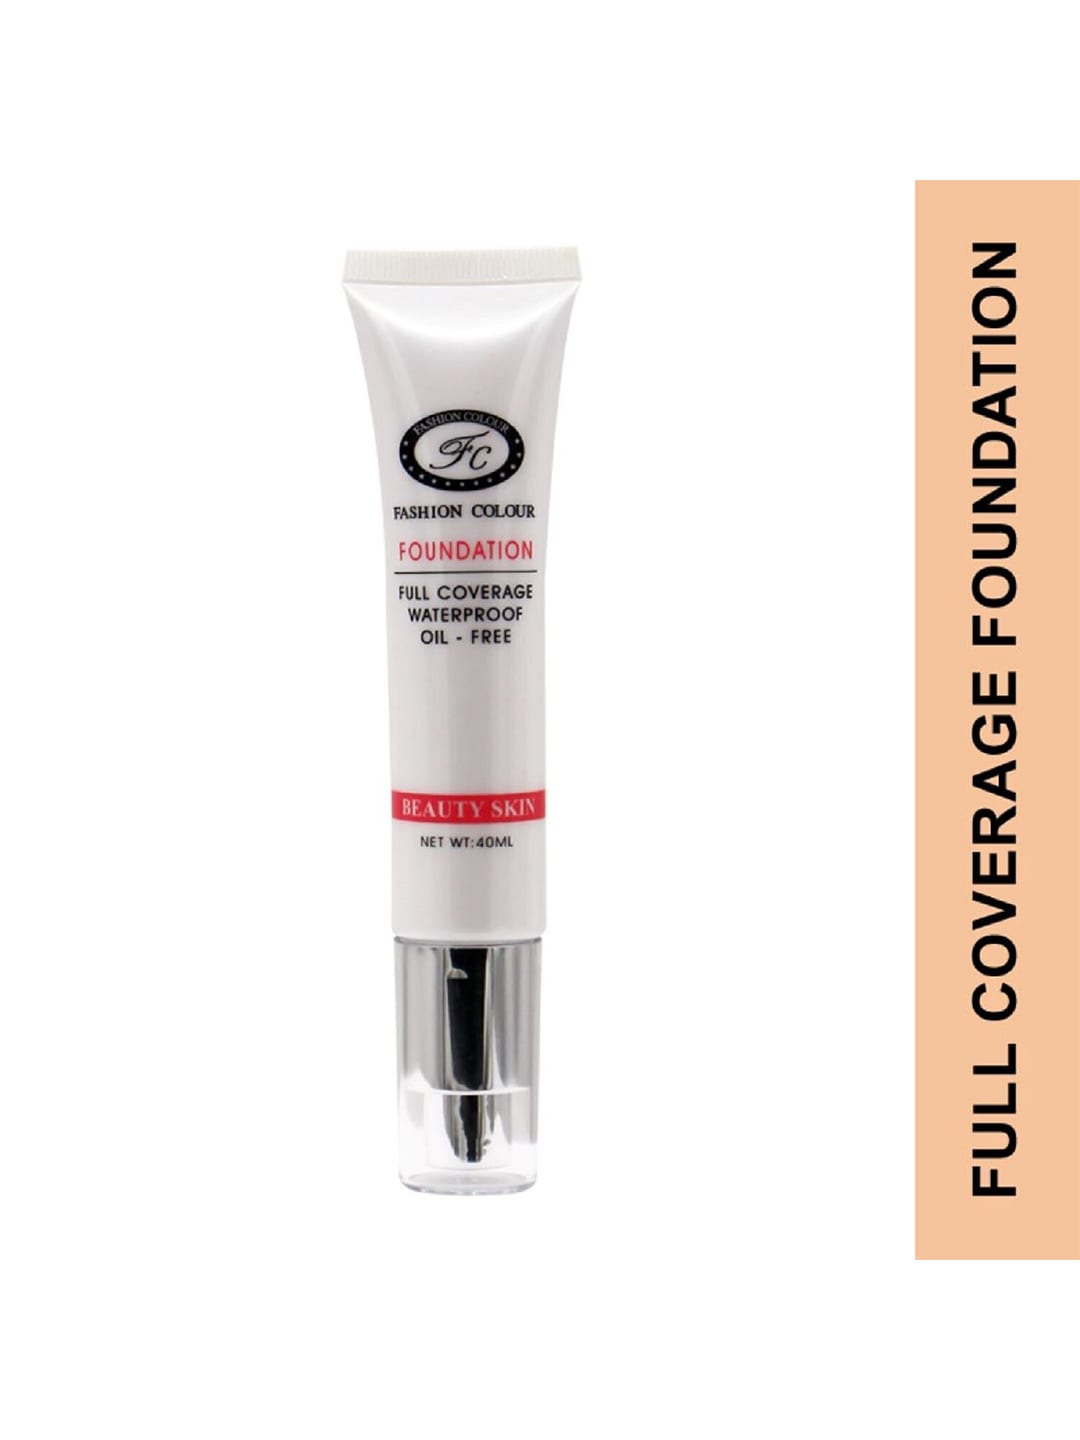 Fashion Colour Oil Free Waterproof Foundation-Shade 01, 40ml Price in India